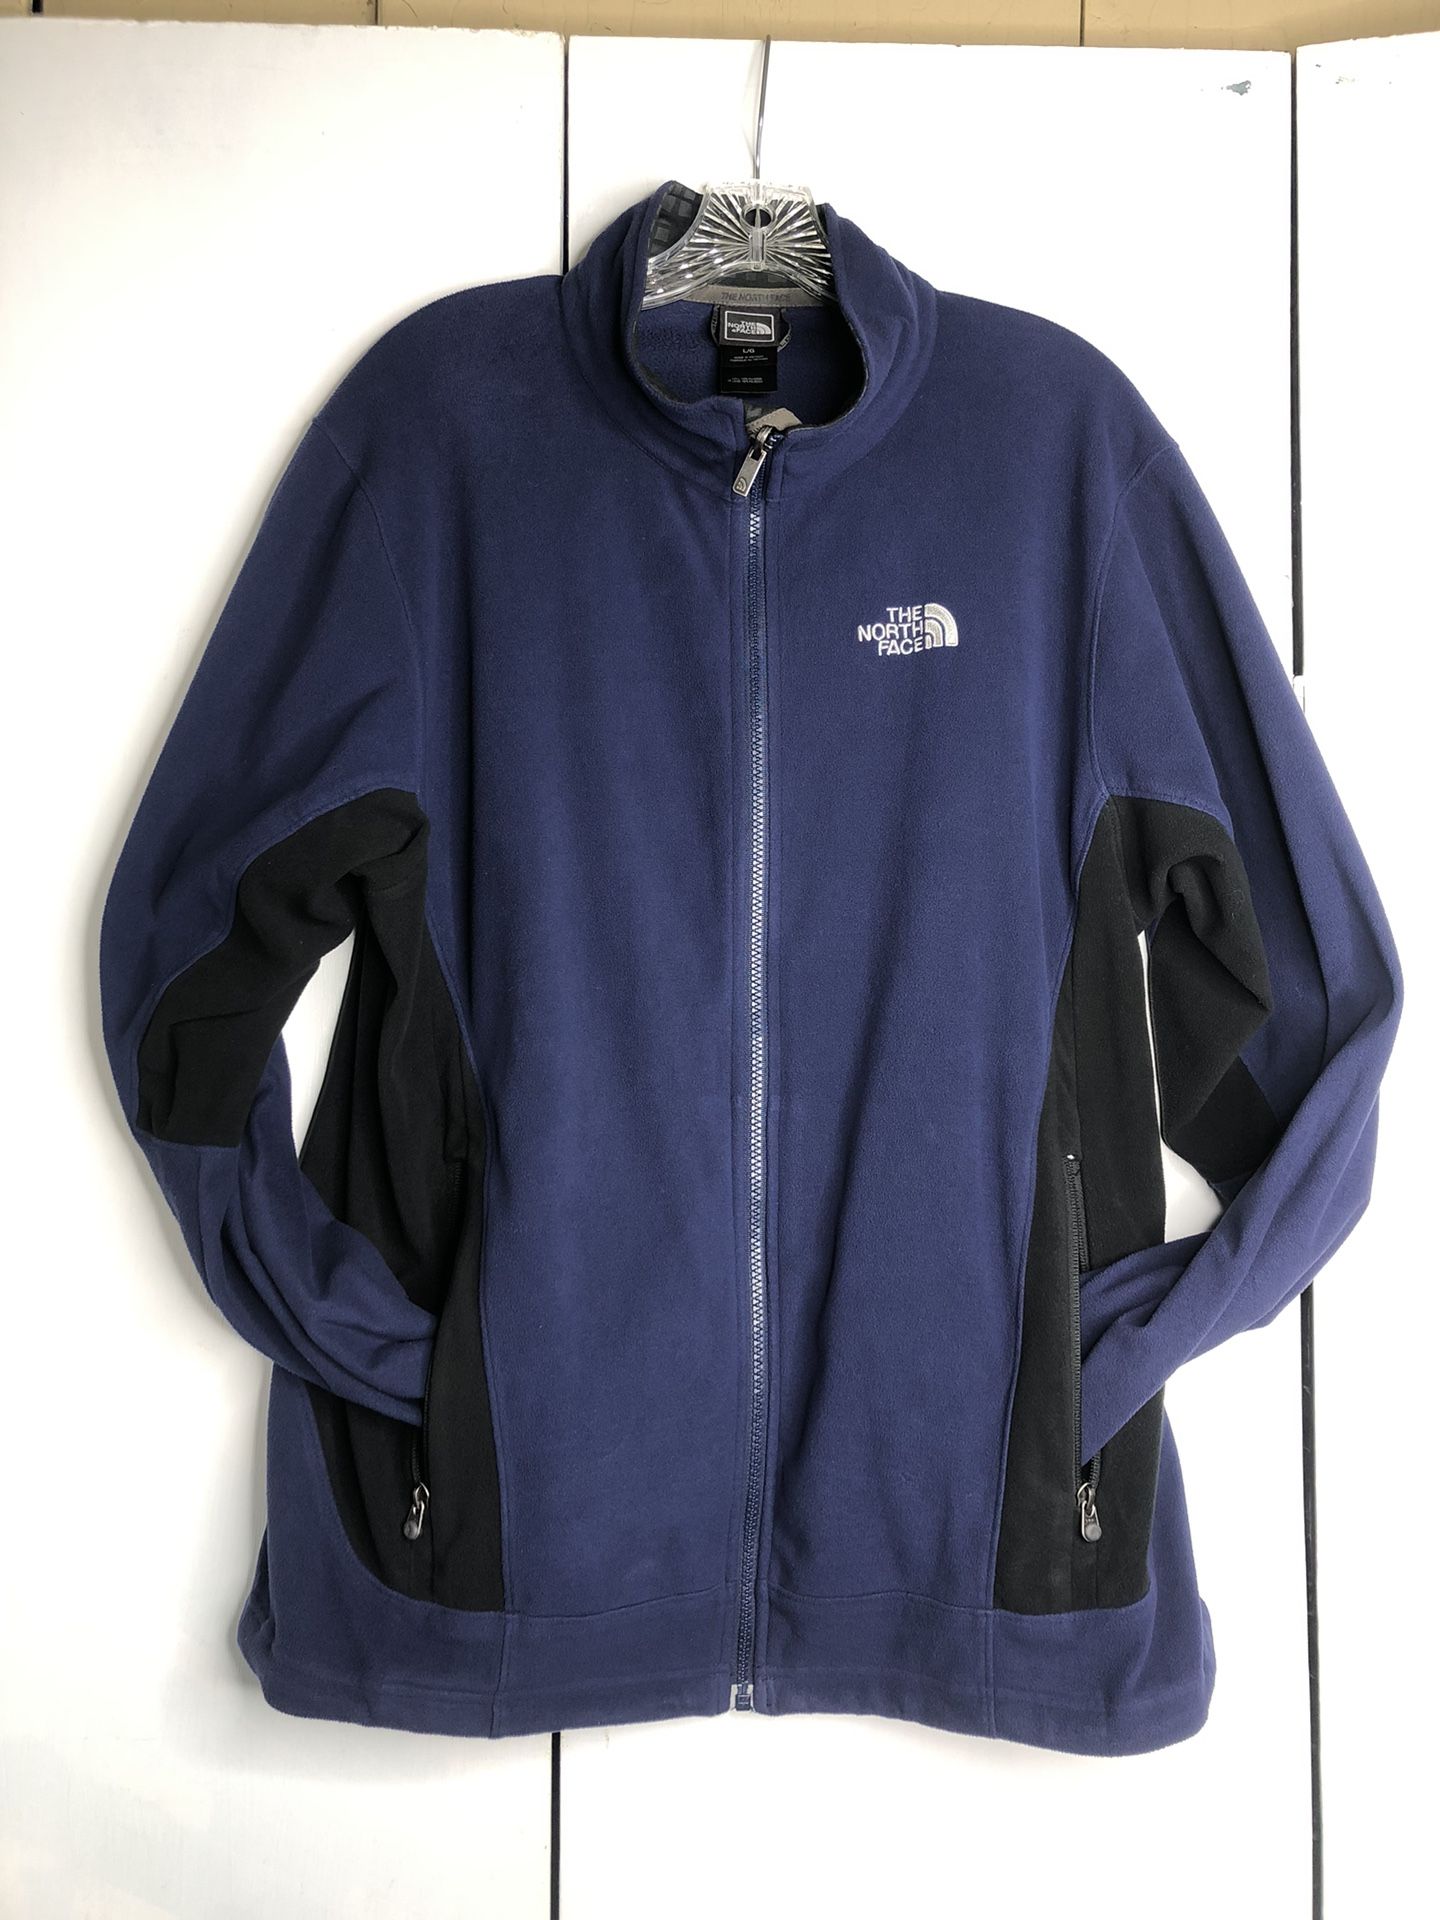 The North Face Men’s Jacket Size Large 